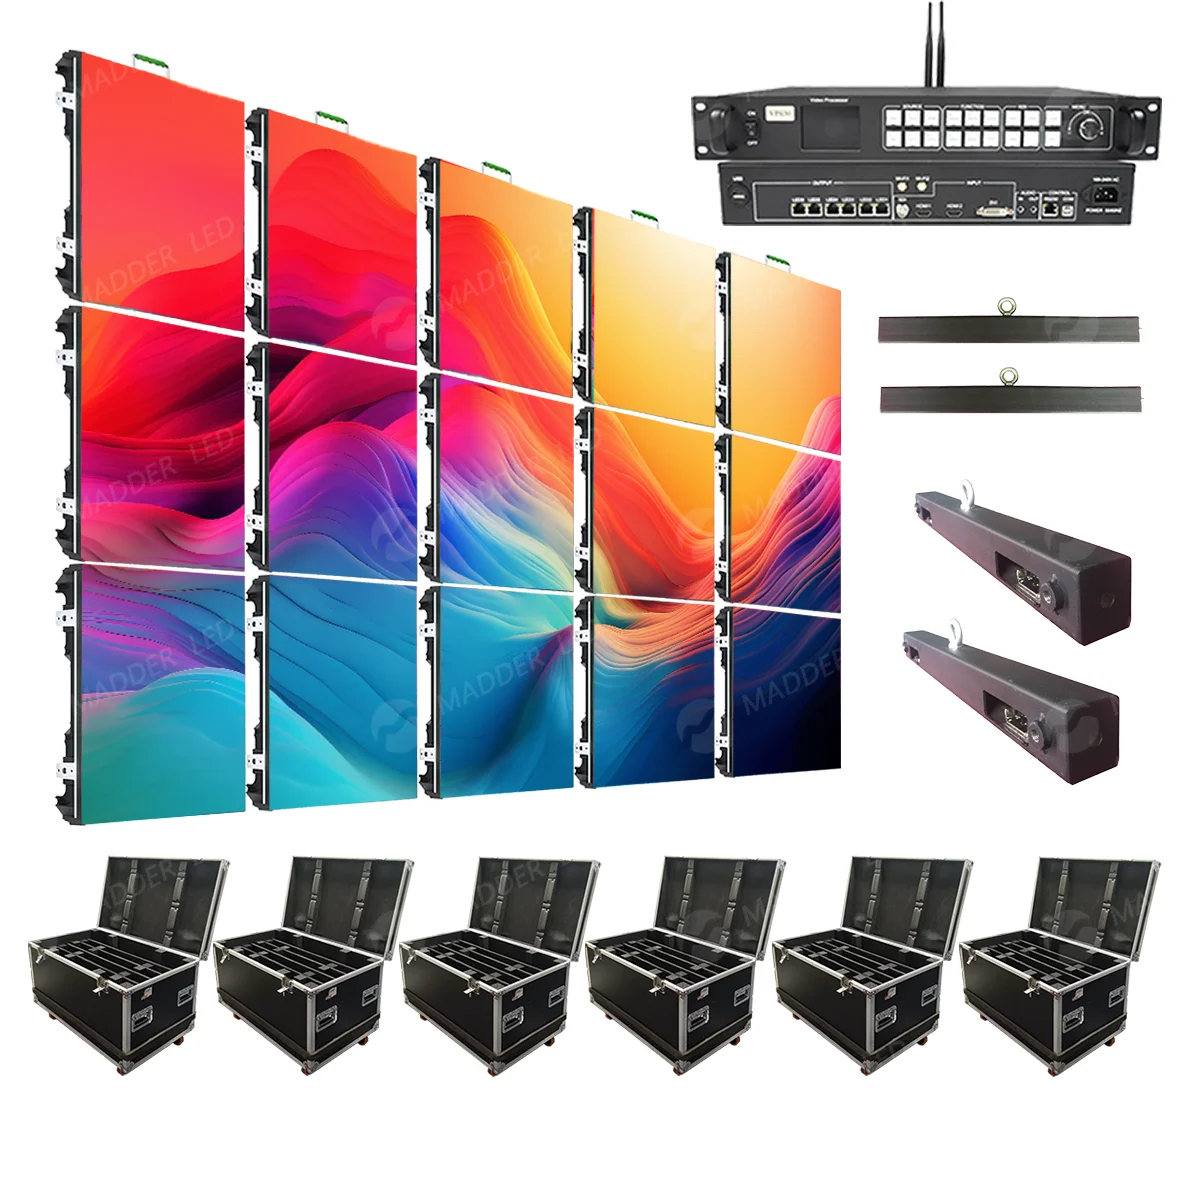 Hd indoor P2.5P2.6P2.97P3.91P4.81 Video wall digital signage advertising large indoor 4K full color HD LED display